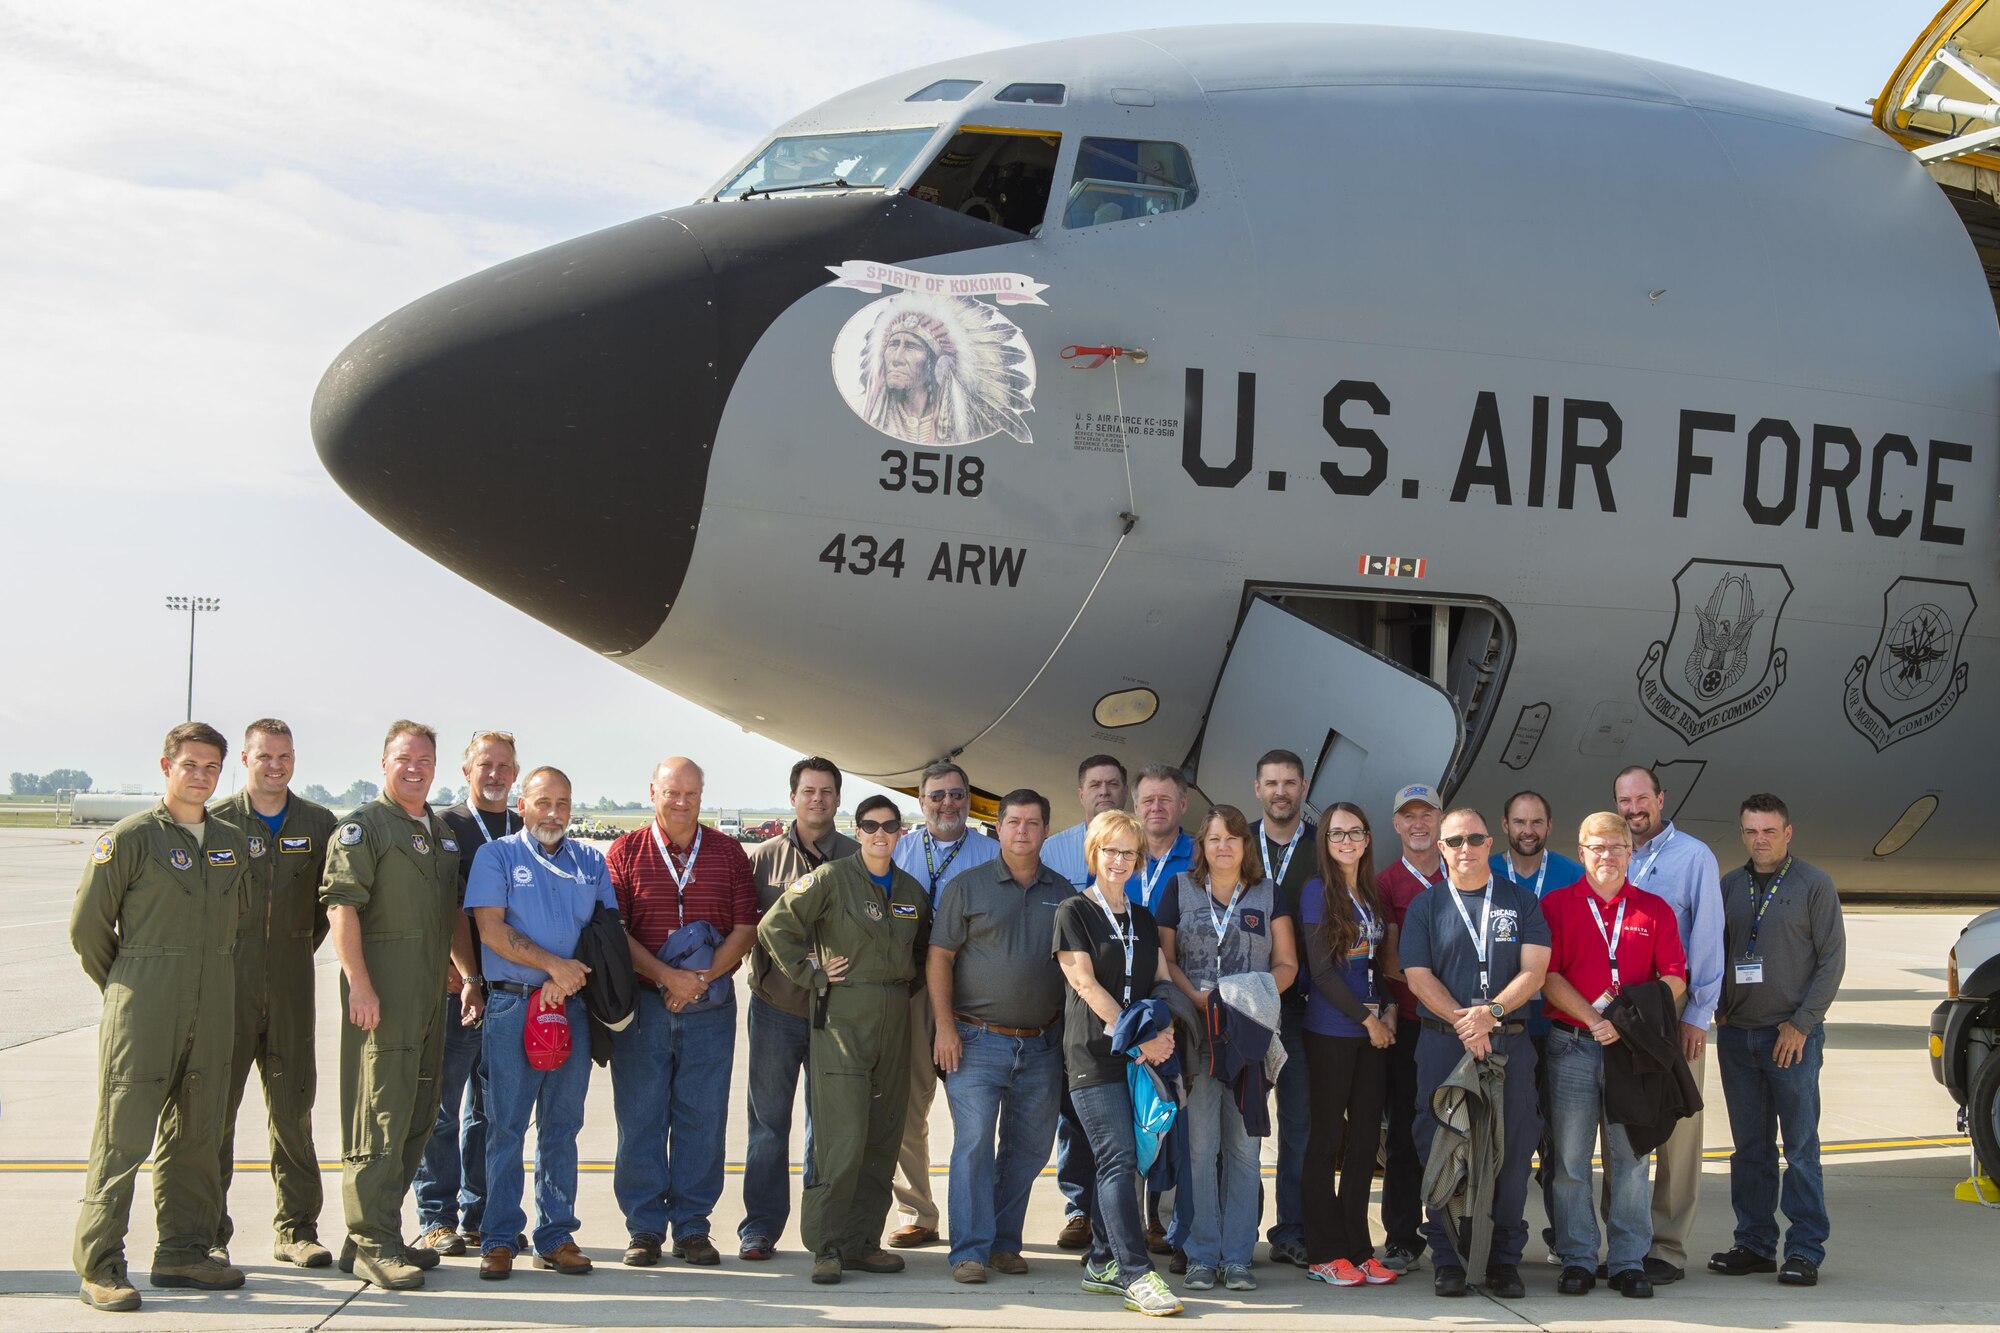 A group of employers pose for a photo in front of a KC-135R Stratotanker from the Air Force Reserve's 434th Air Refueling Wing at Grissom Air Reserve Base, Ind., before taking off on a refueling mission Aug. 19, 2016. Indiana's three wings partnered together to fly 46 employers of guardsmen and reservists on a Bosslift aimed at educating them about their employees' military service and responsibilities. (U.S. Air Force photo/Tech. Sgt. Benjamin Mota)